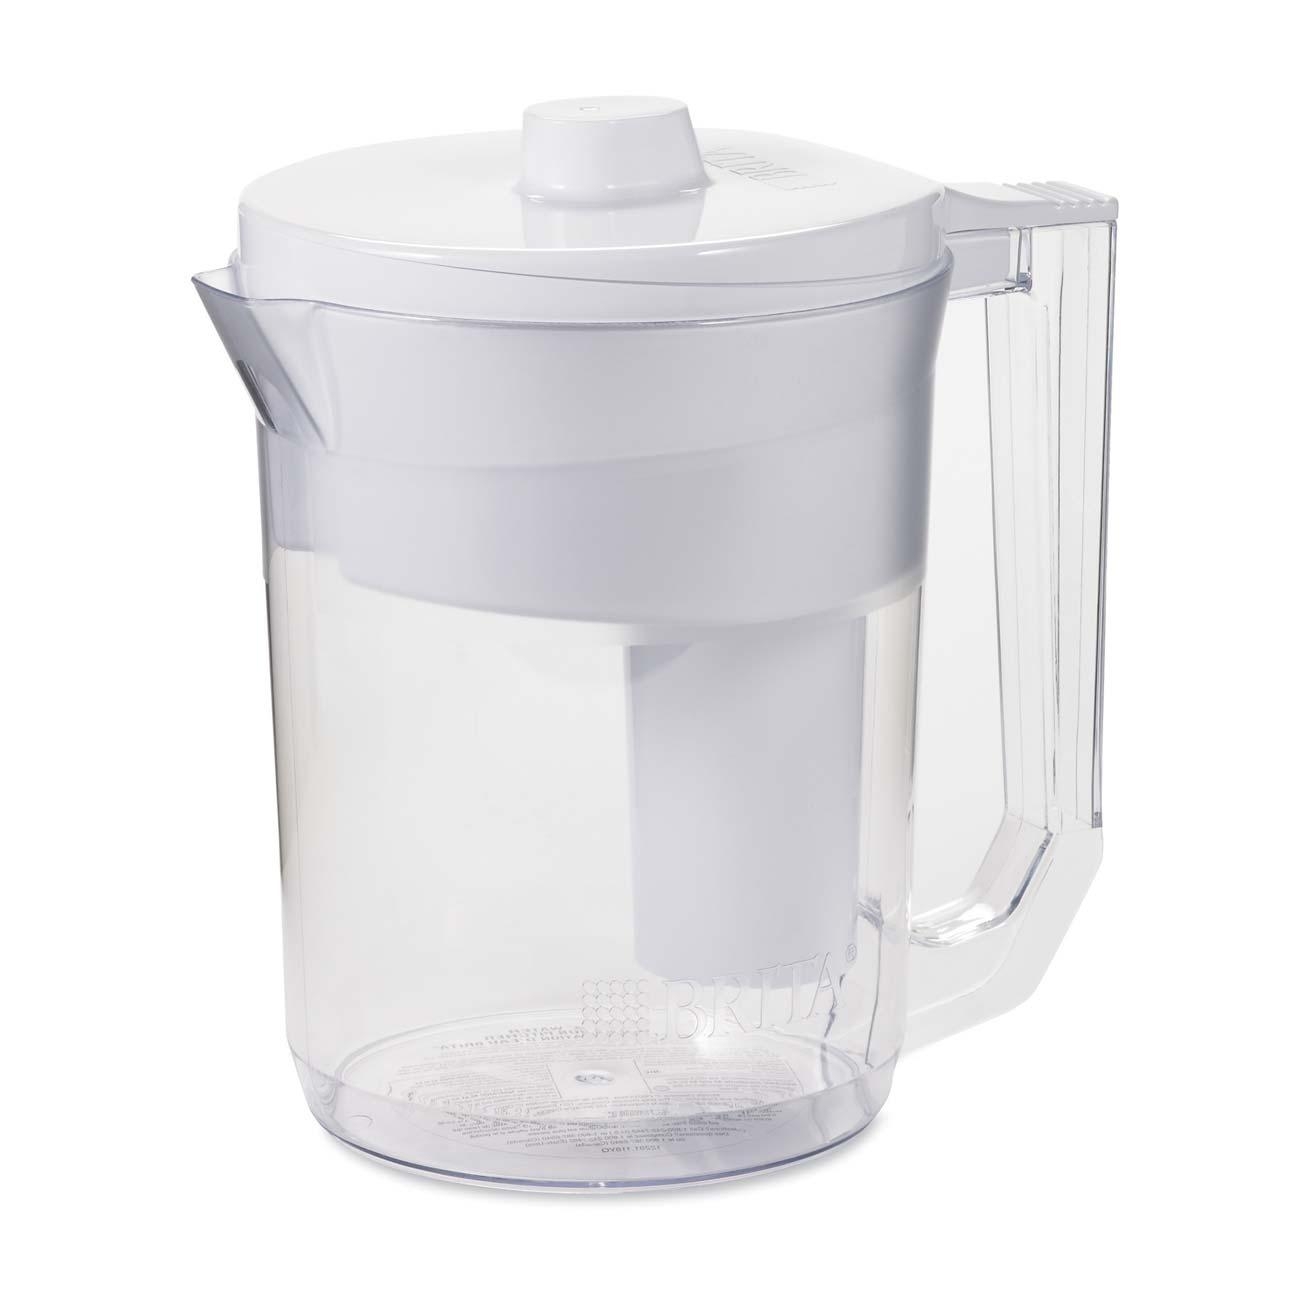 Classic Pitcher - image 1 of 2